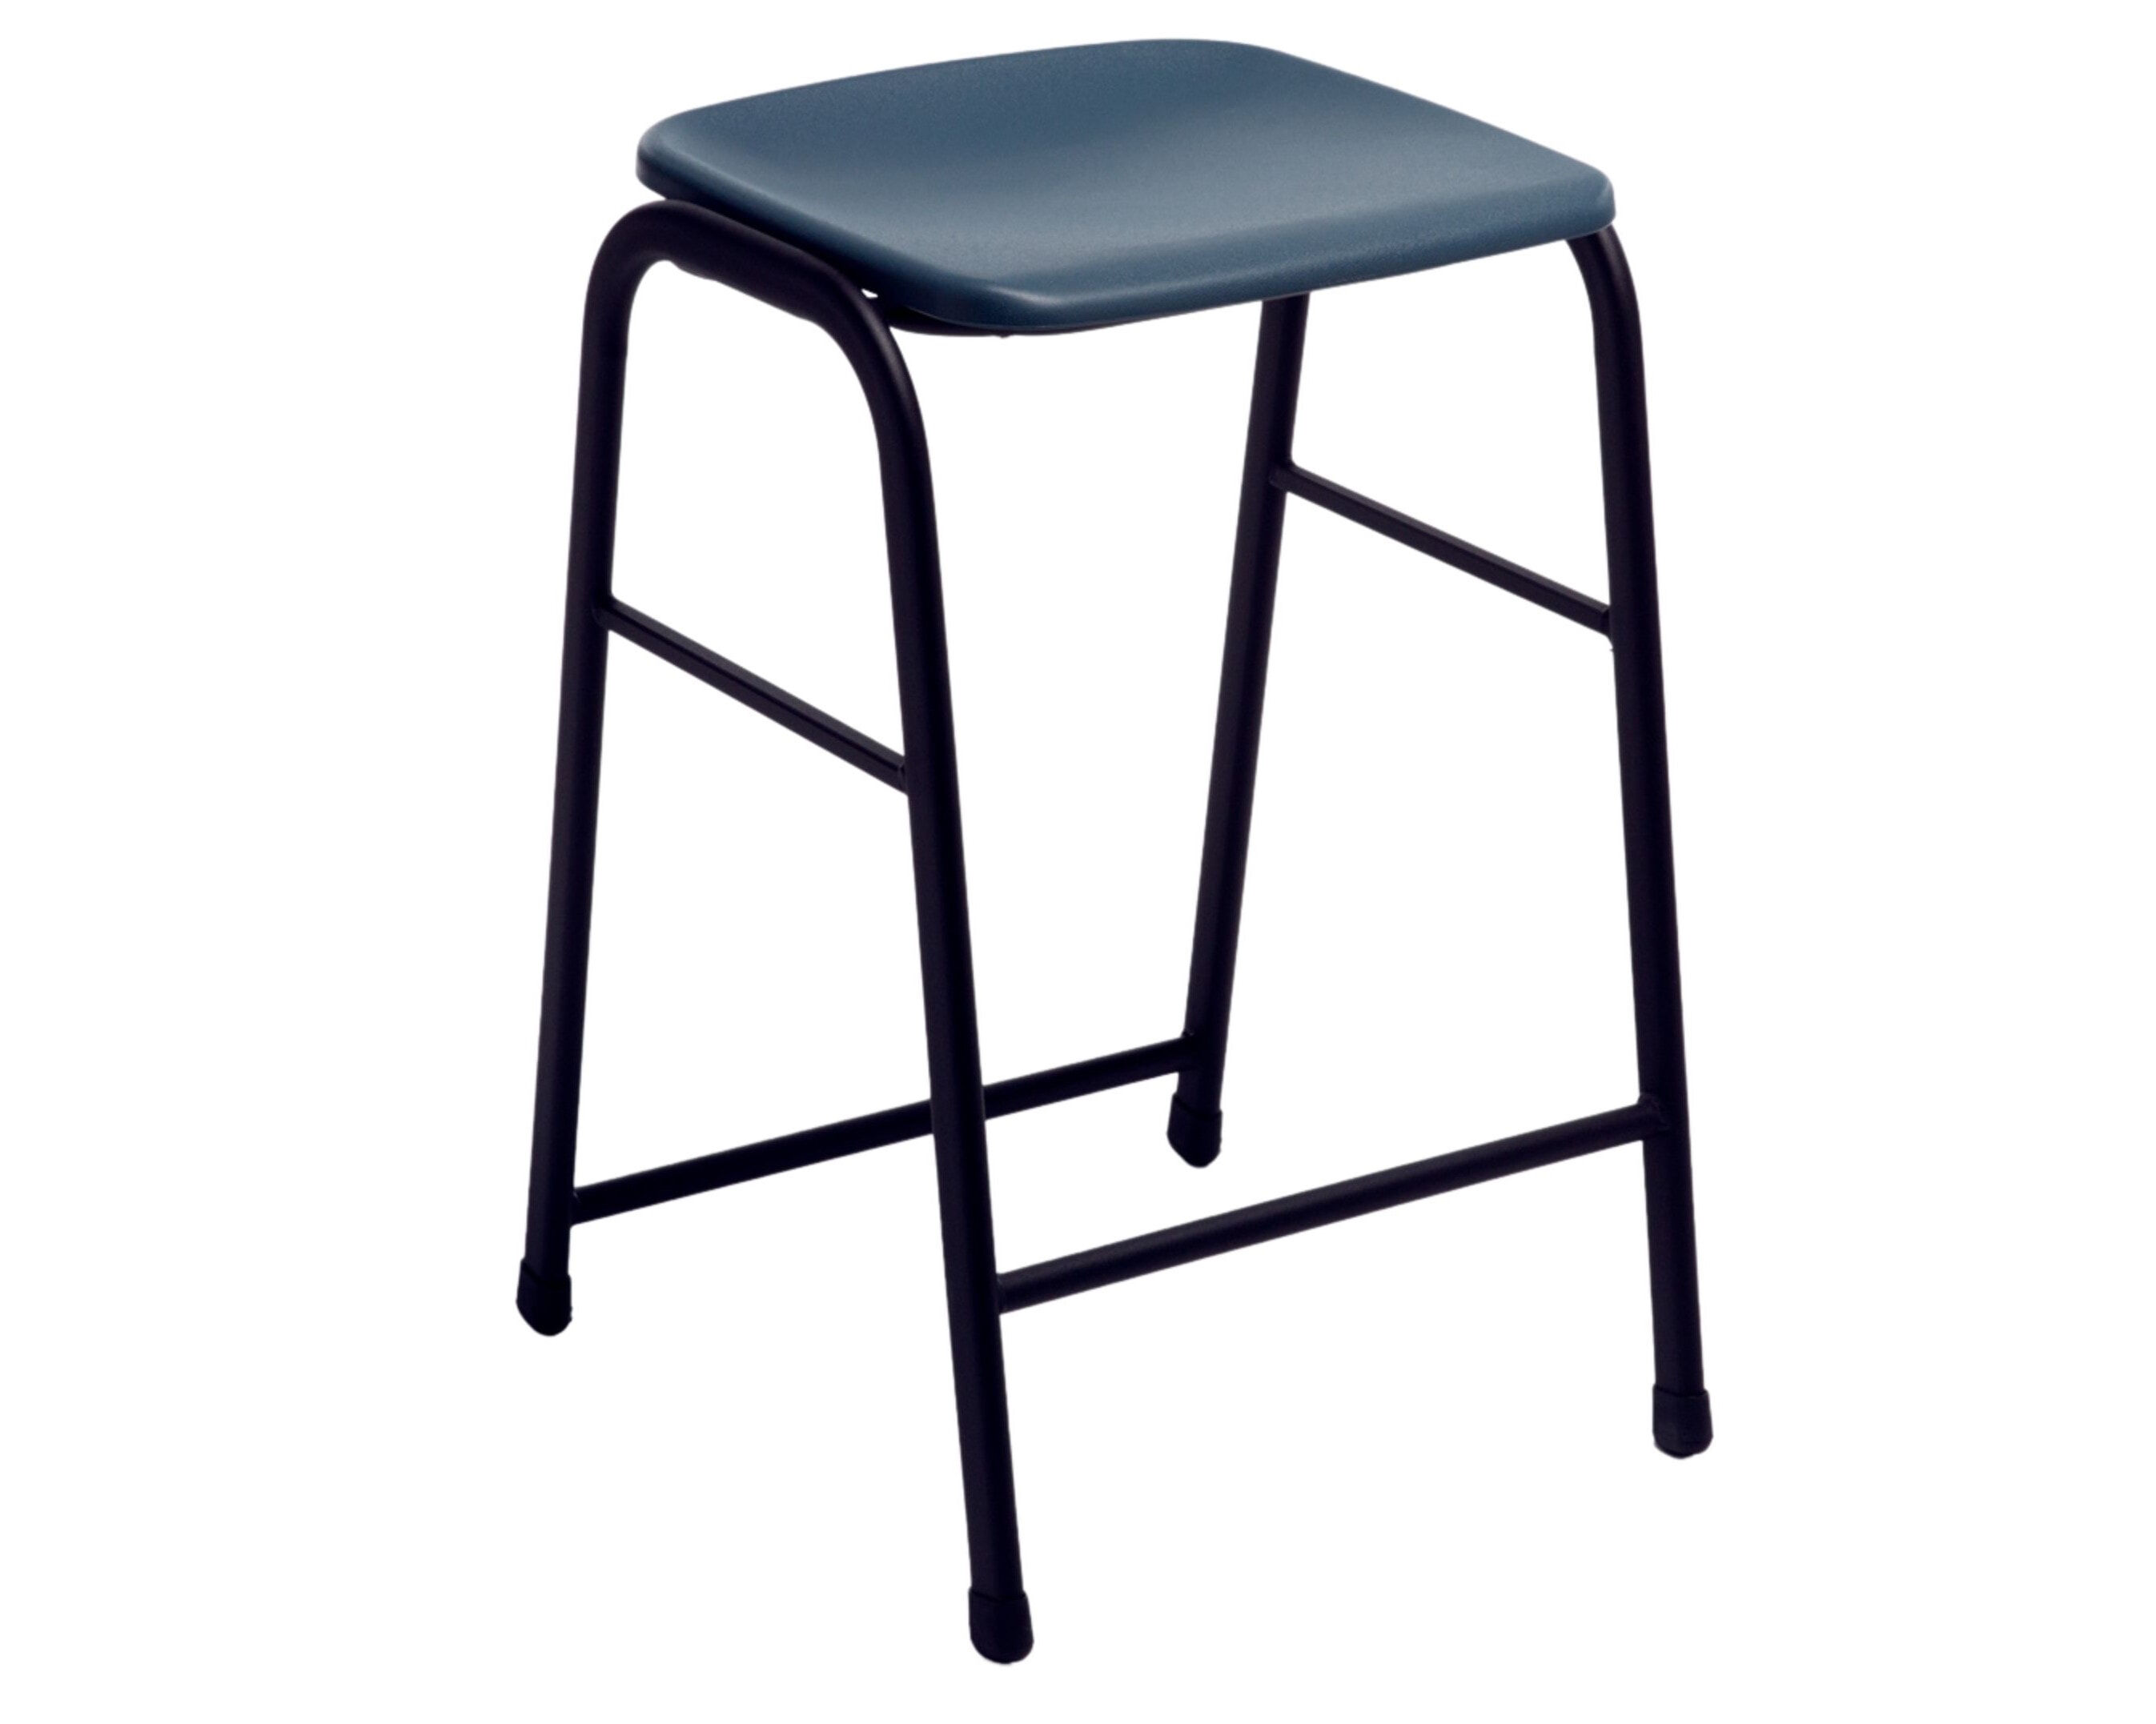 Research Stool